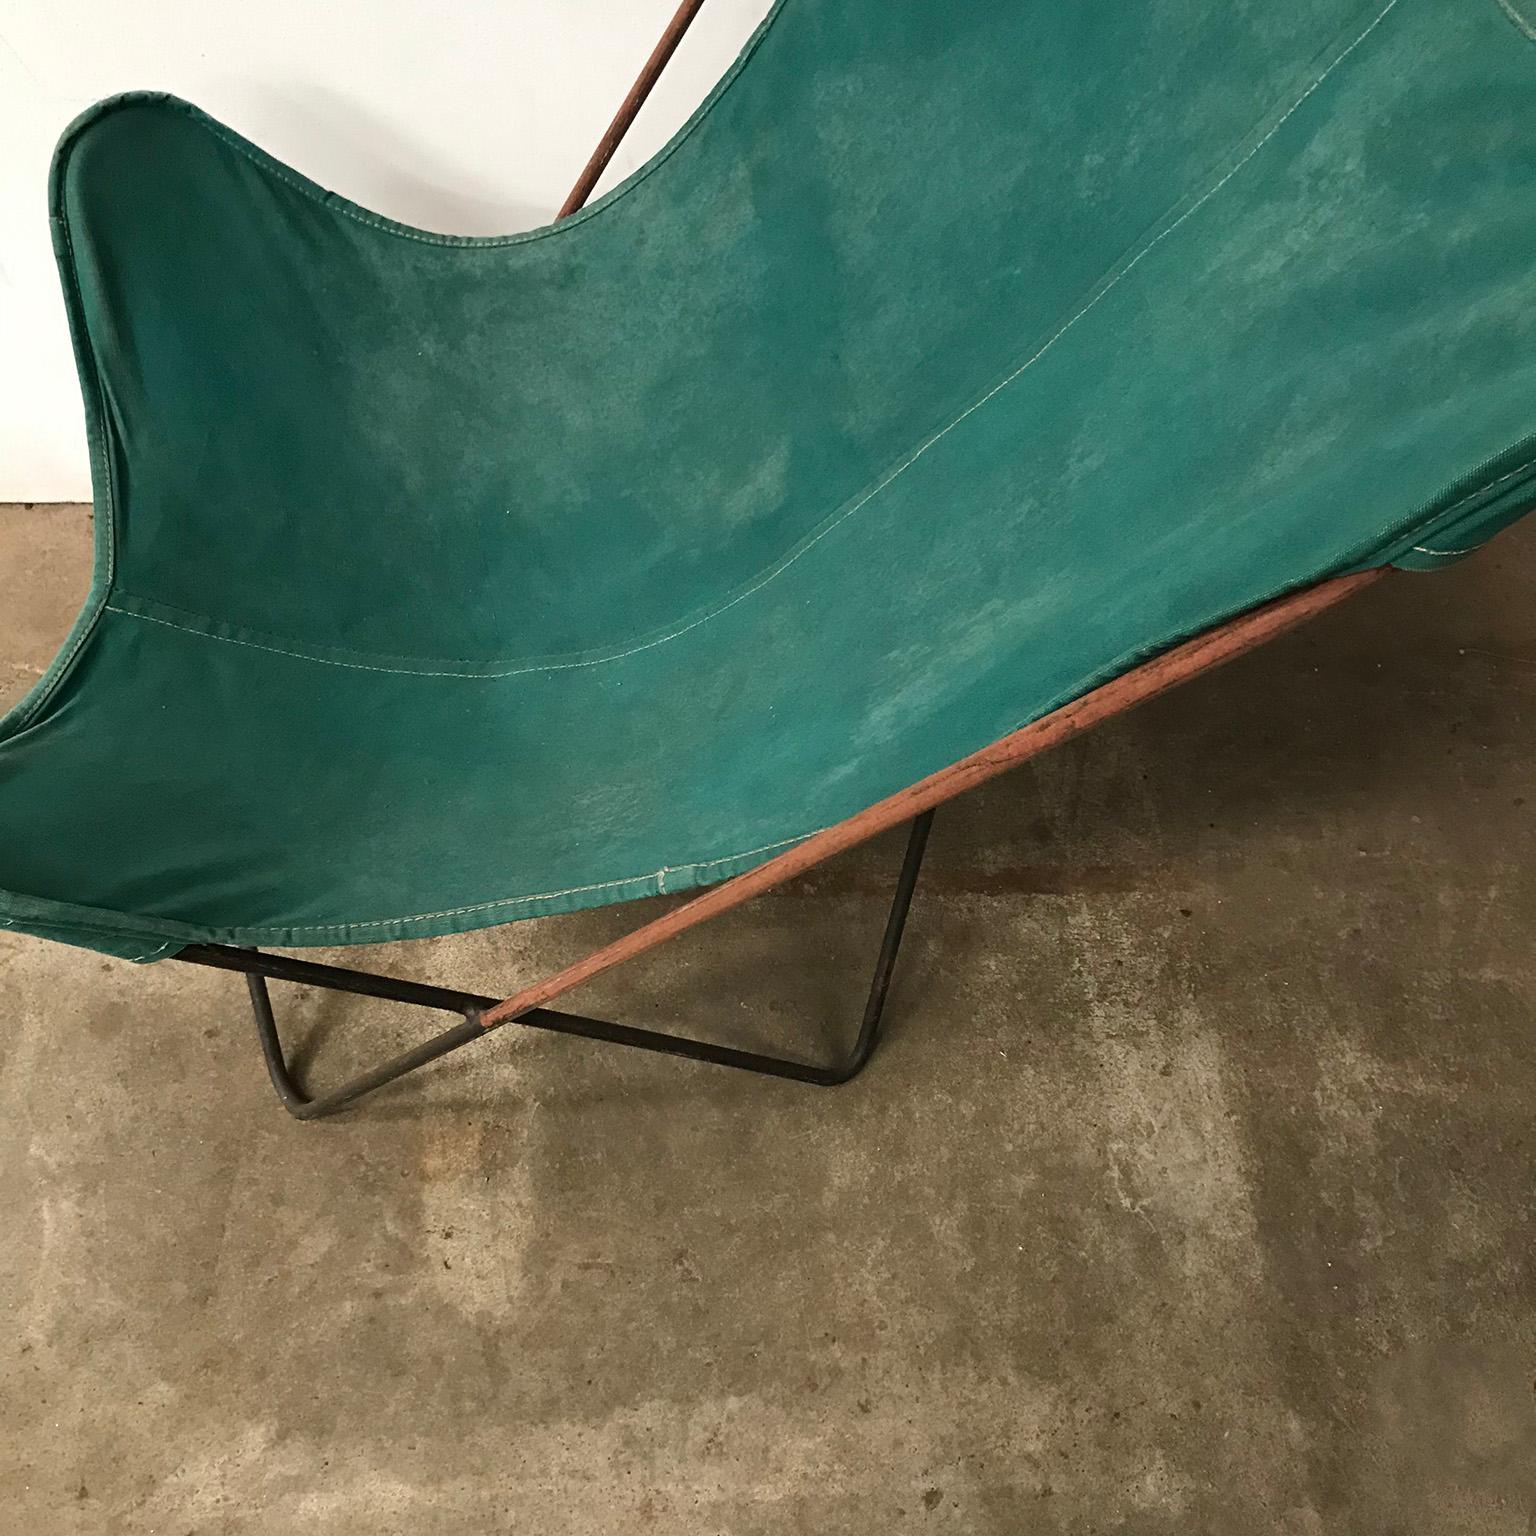 1947, Hardoy, Ferrari, Green Cover with Grey Base Butterfly Chair 2